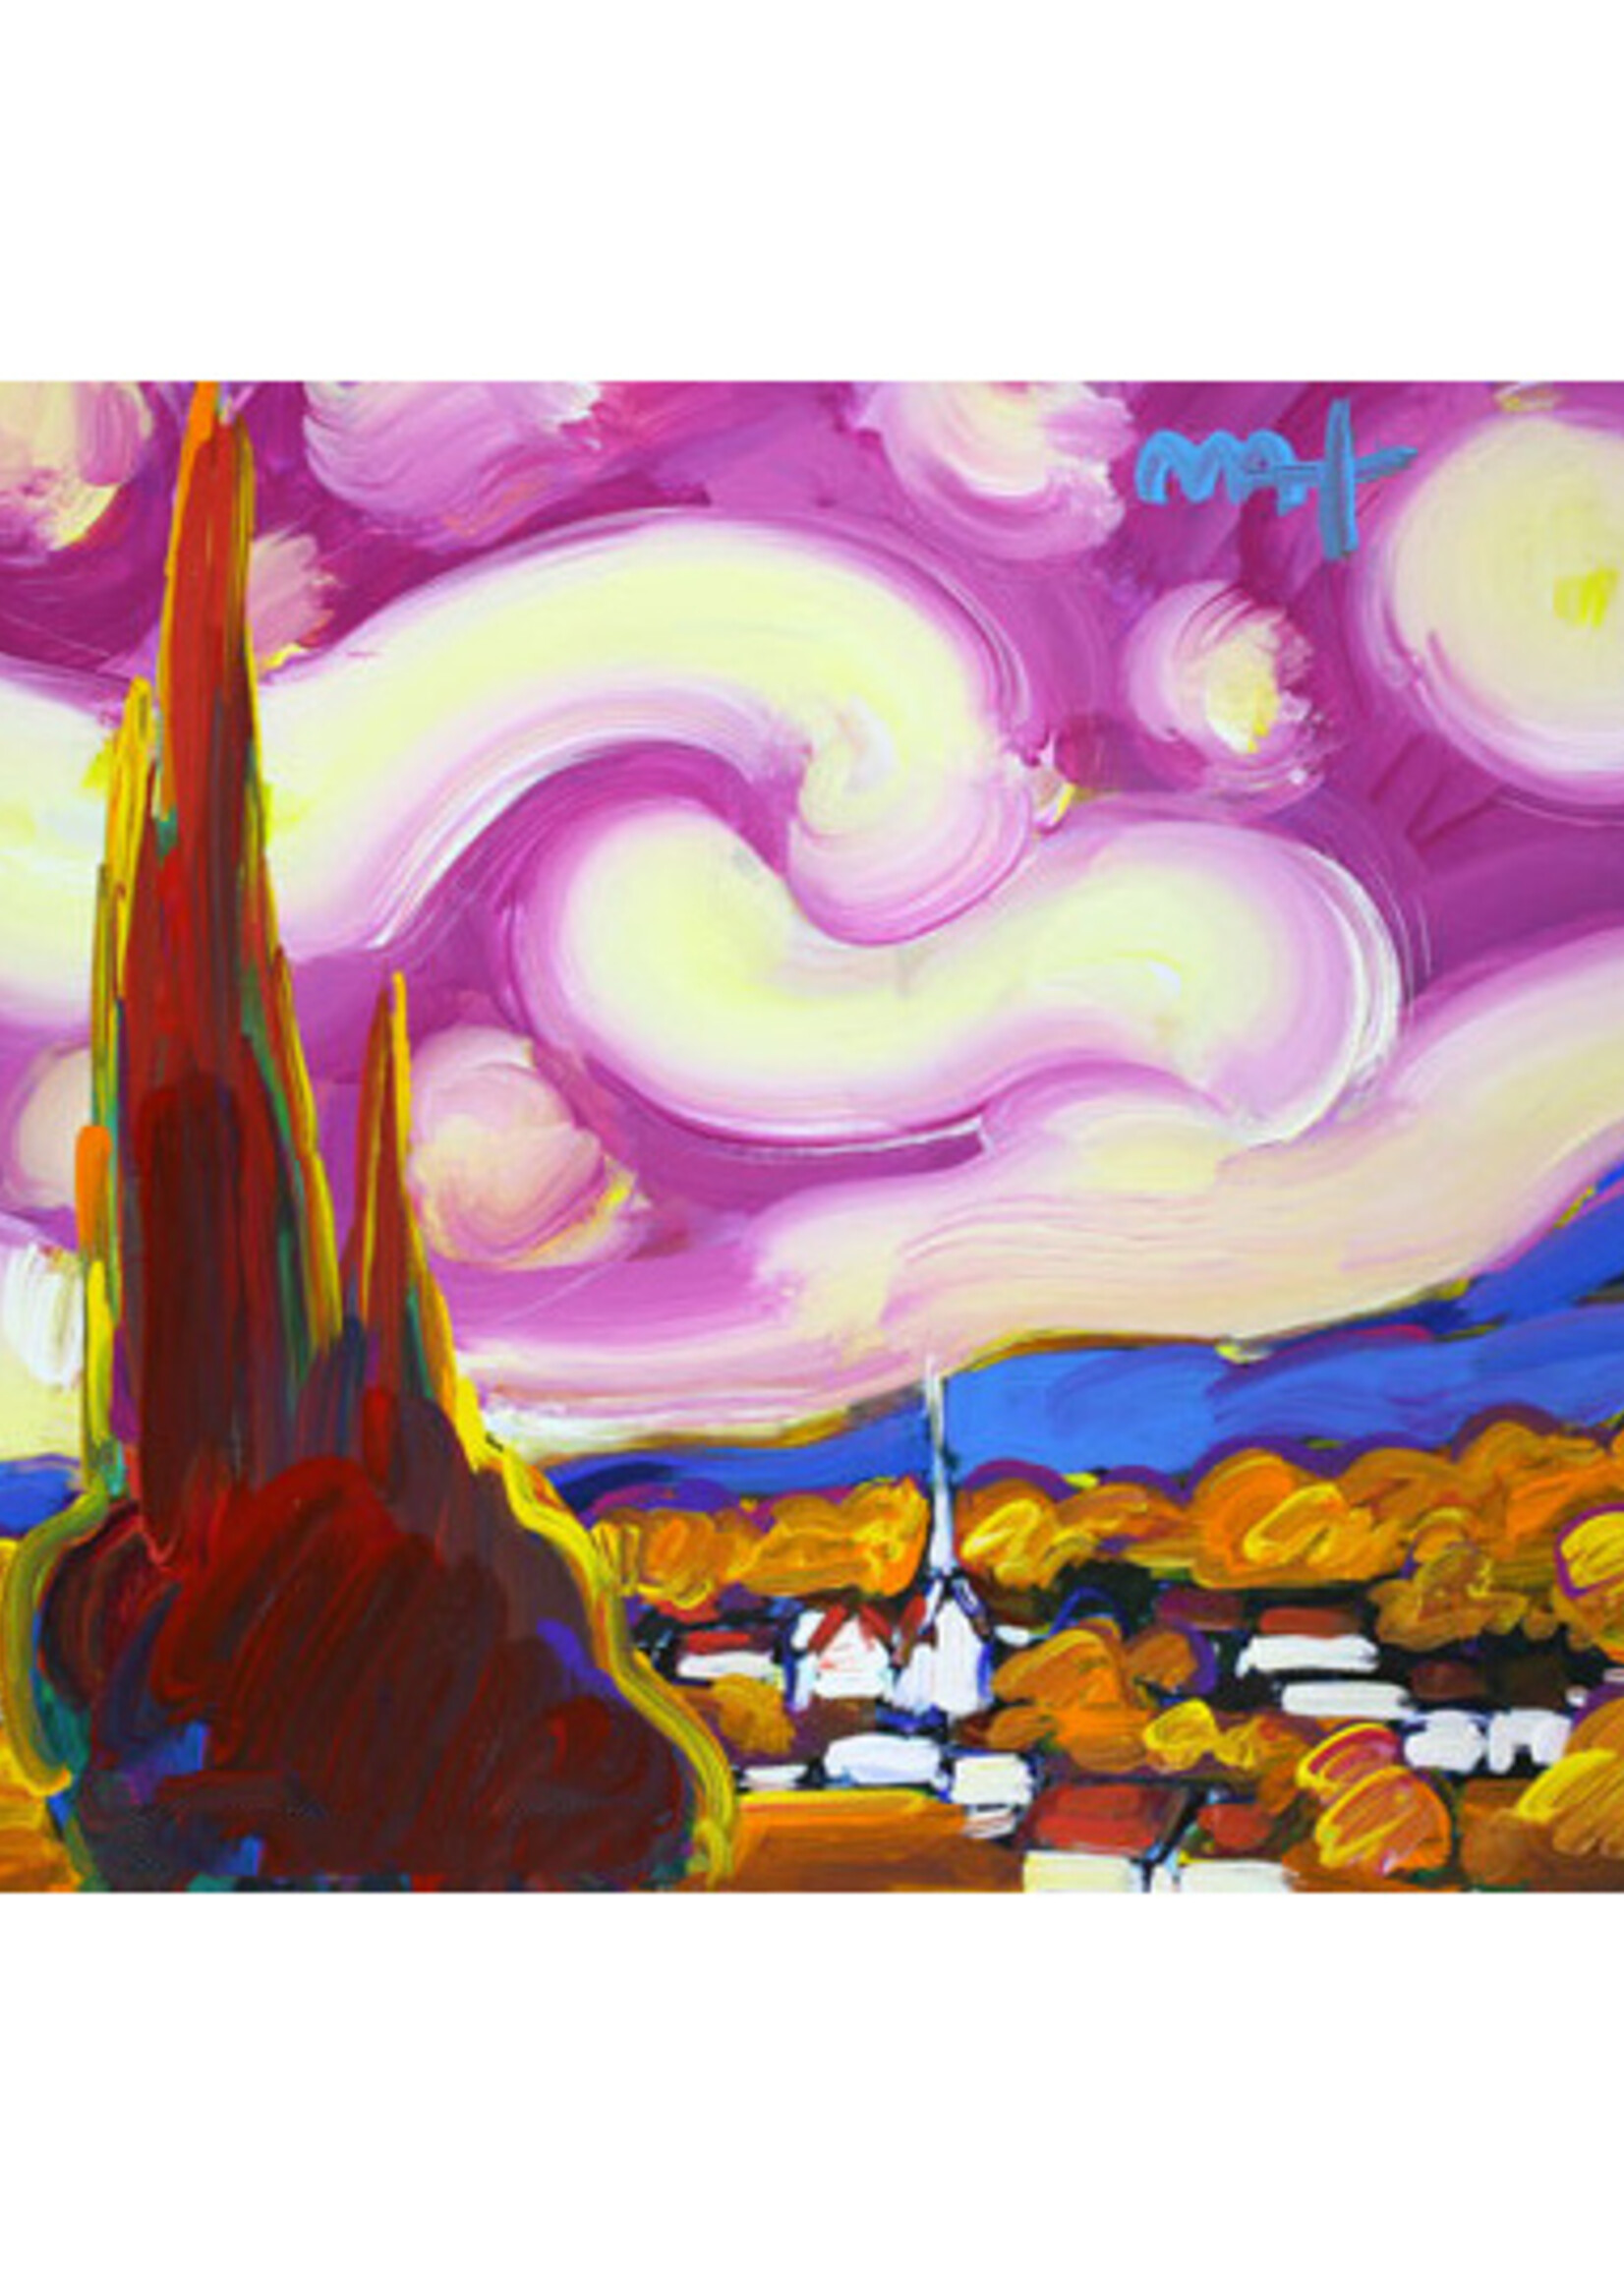 Peter Max Peter Max "Starry Starry Night (Pink)"